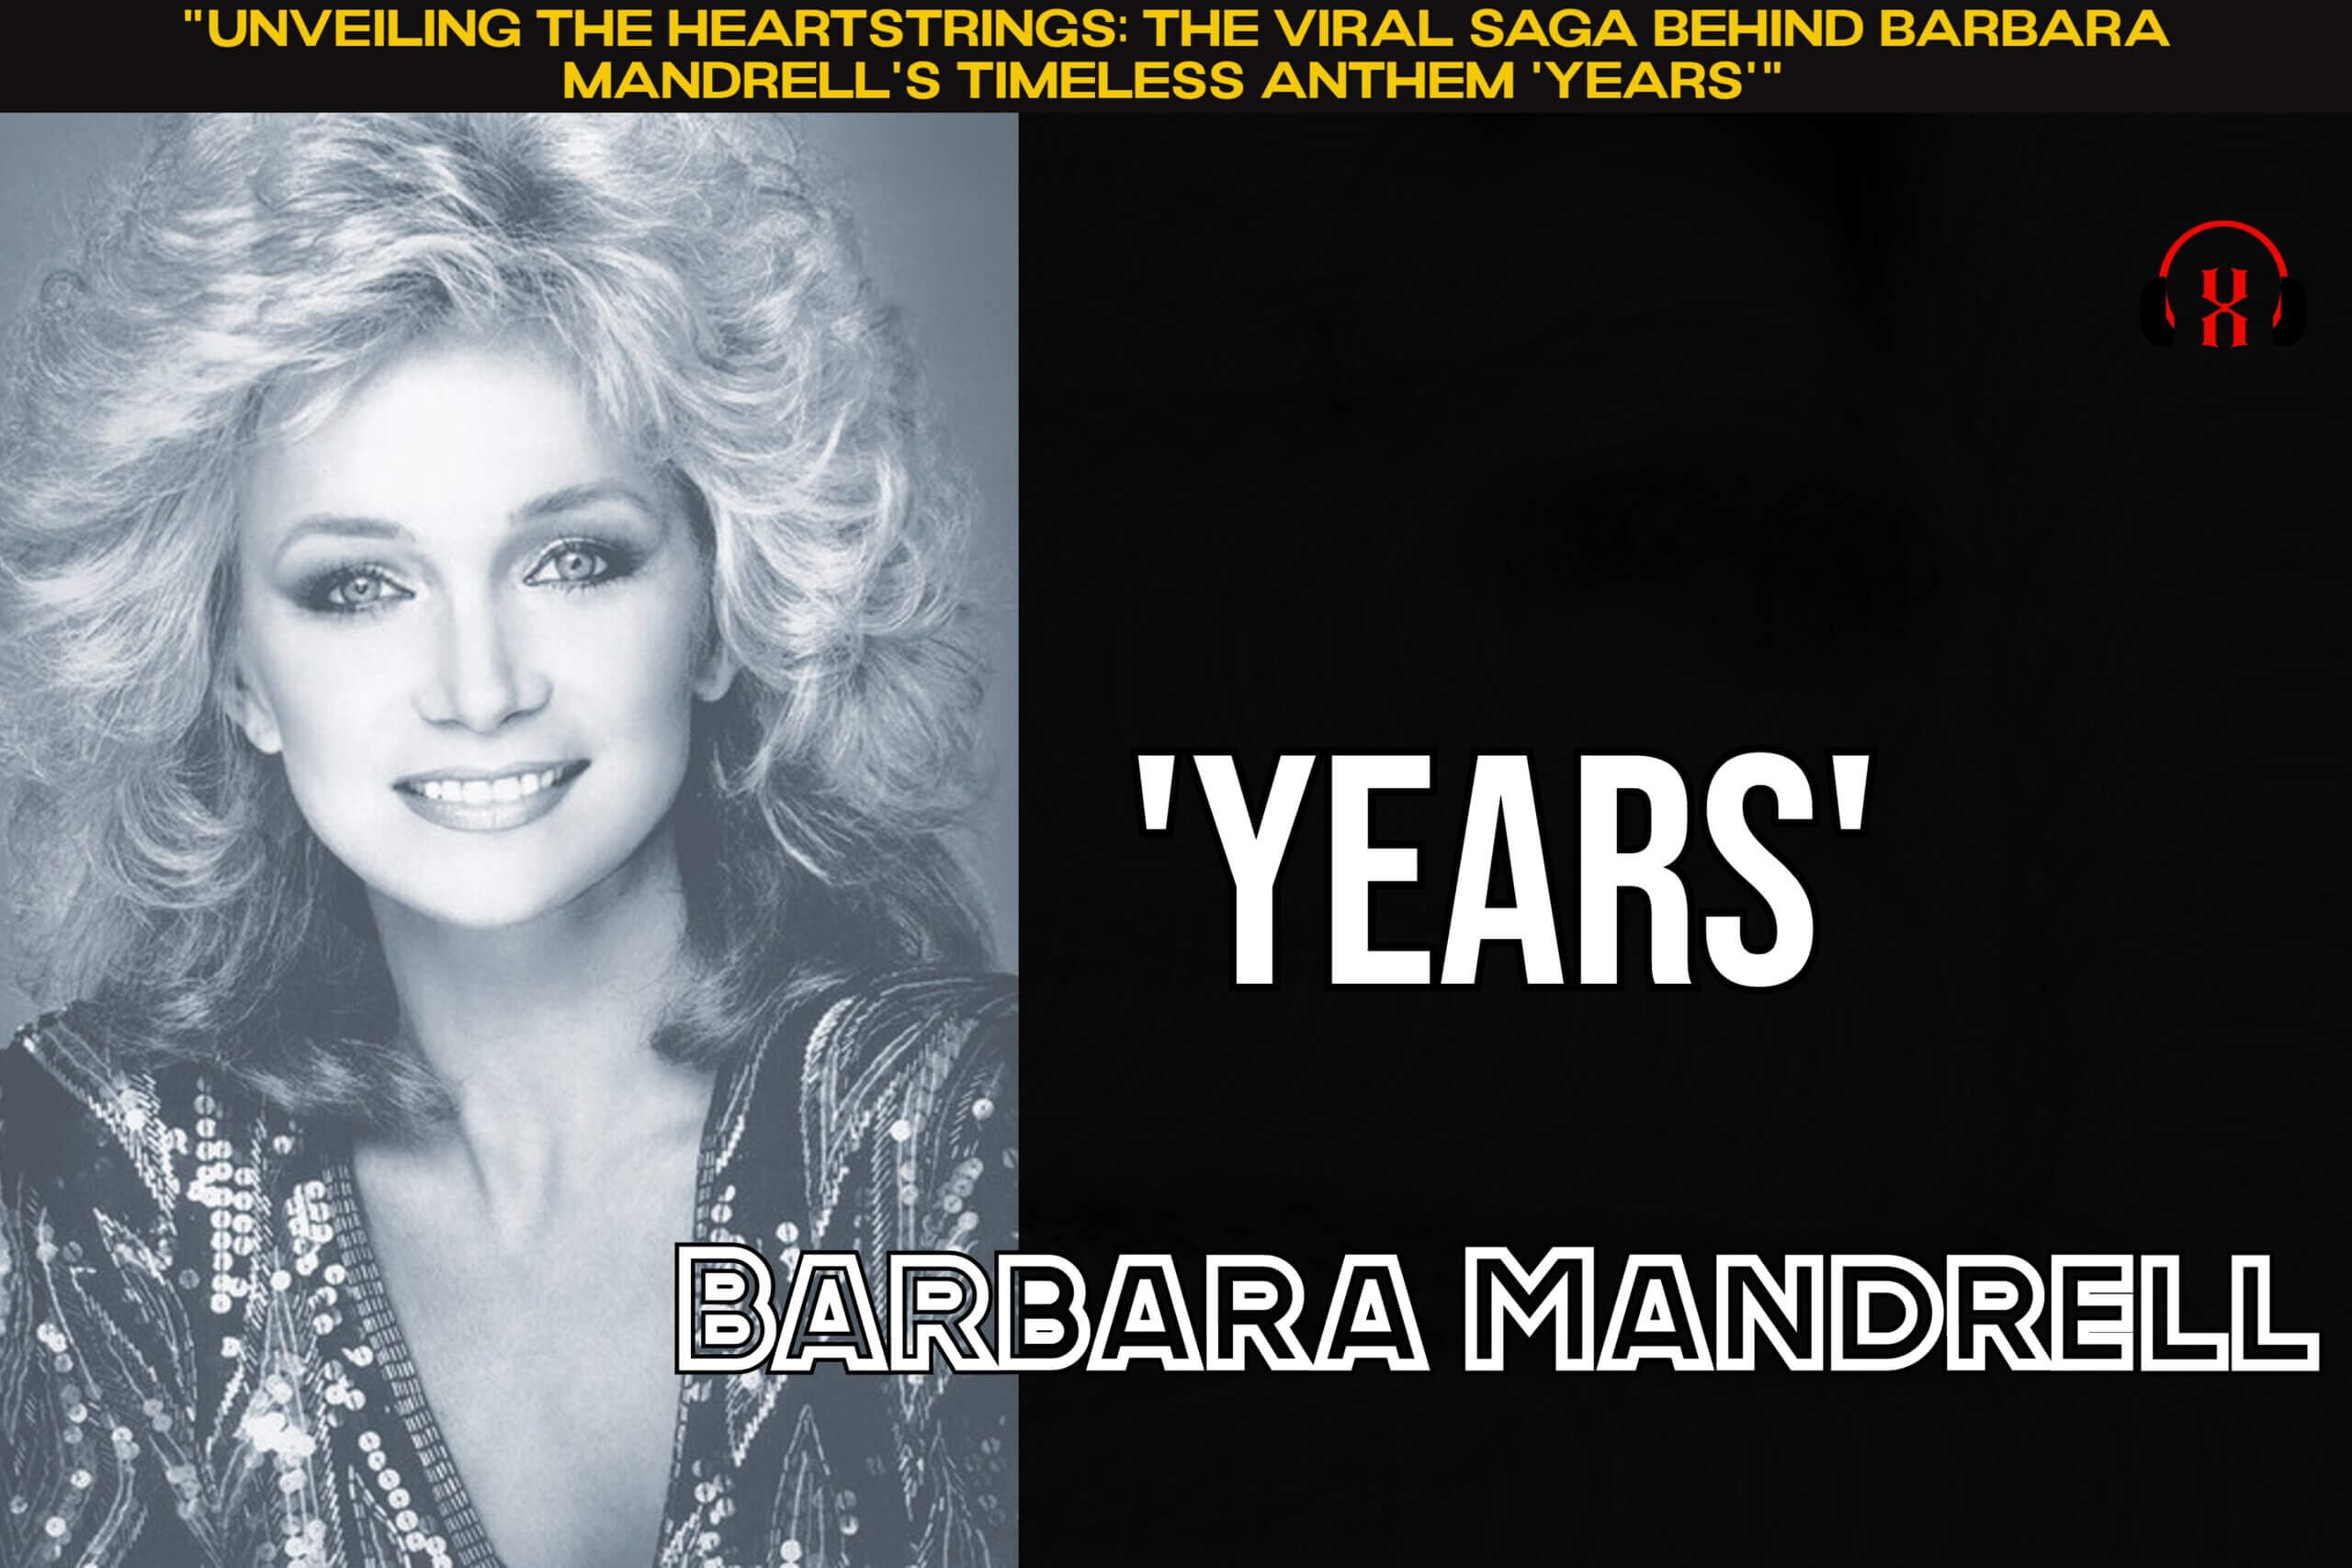 Unveiling the Heartstrings The Viral Saga Behind Barbara Mandrell's Timeless Anthem 'Years'